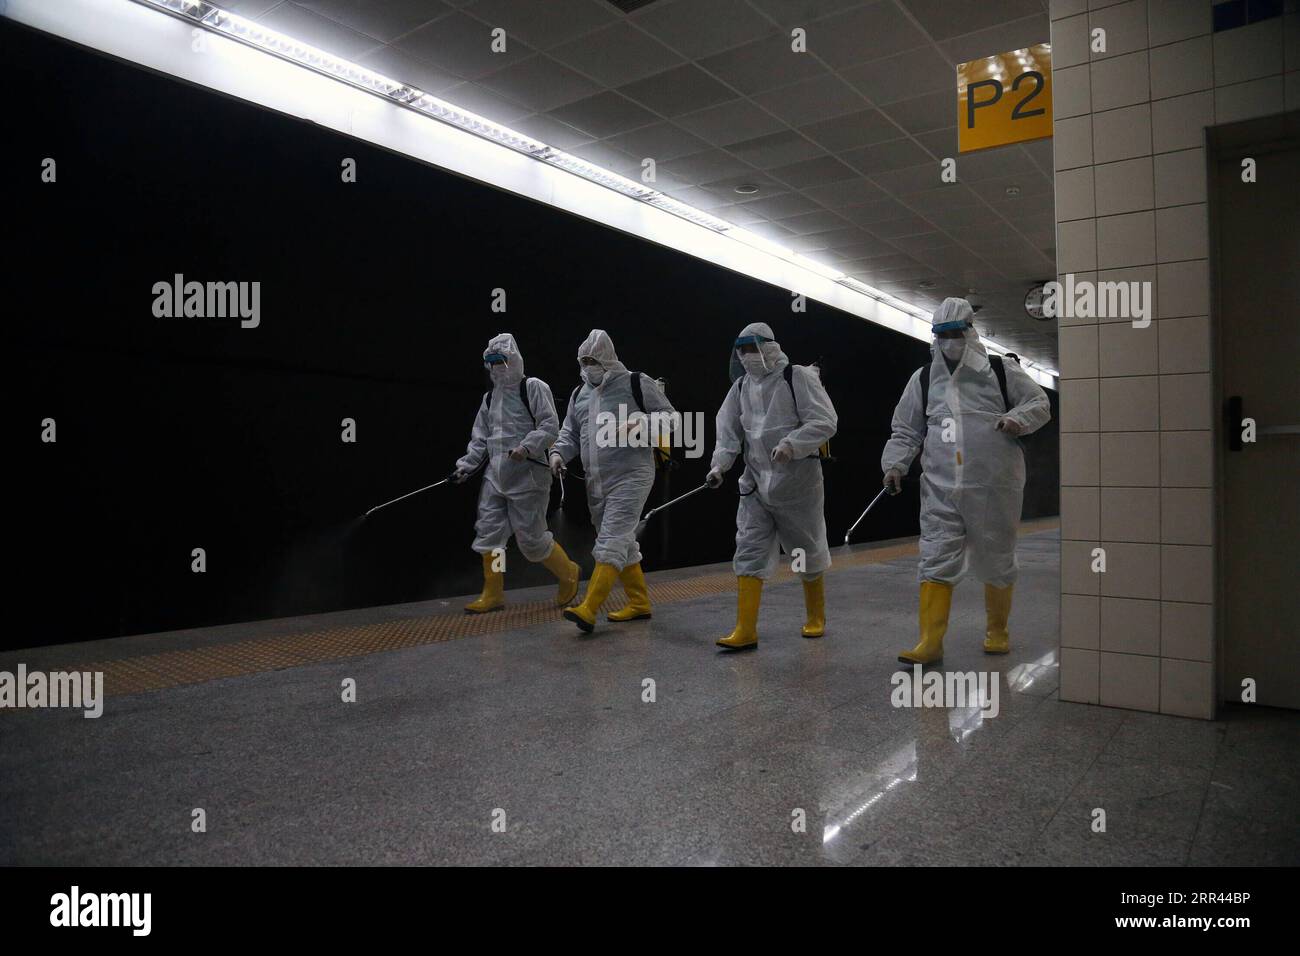 201120 -- ANKARA, Nov. 20, 2020 -- Sanitation workers in personal protective equipment conduct disinfection on the platform of a subway station in Ankara, Turkey, Nov. 19, 2020. Turkey reported 4,542 new COVID-19 patients on Thursday, raising the total coronavirus infections in the country to 430,170, the Turkish Health Ministry announced. It also confirmed that 123 more people died in the past 24 hours, taking the death toll in Turkey to 11,943, while the tally of recoveries increased by 2,918 to 364,573. photo by /Xinhua TURKEY-ANKARA-COVID-19-SUBWAY DISINFECTION MustafaxKaya PUBLICATIONxNOT Stock Photo